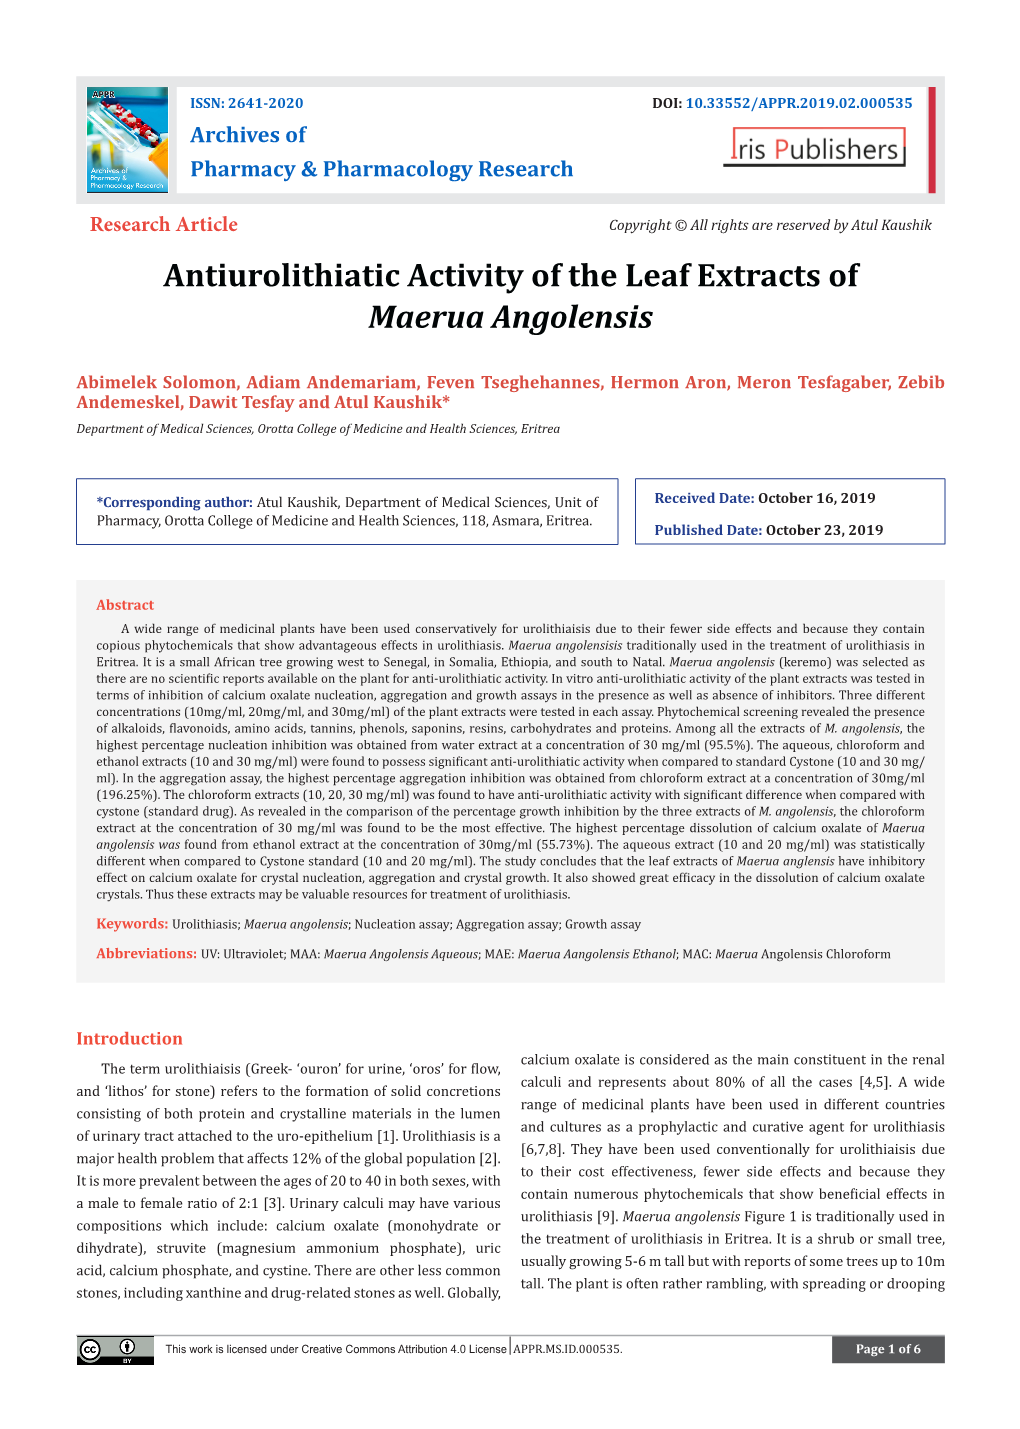 Antiurolithiatic Activity of the Leaf Extracts of Maerua Angolensis